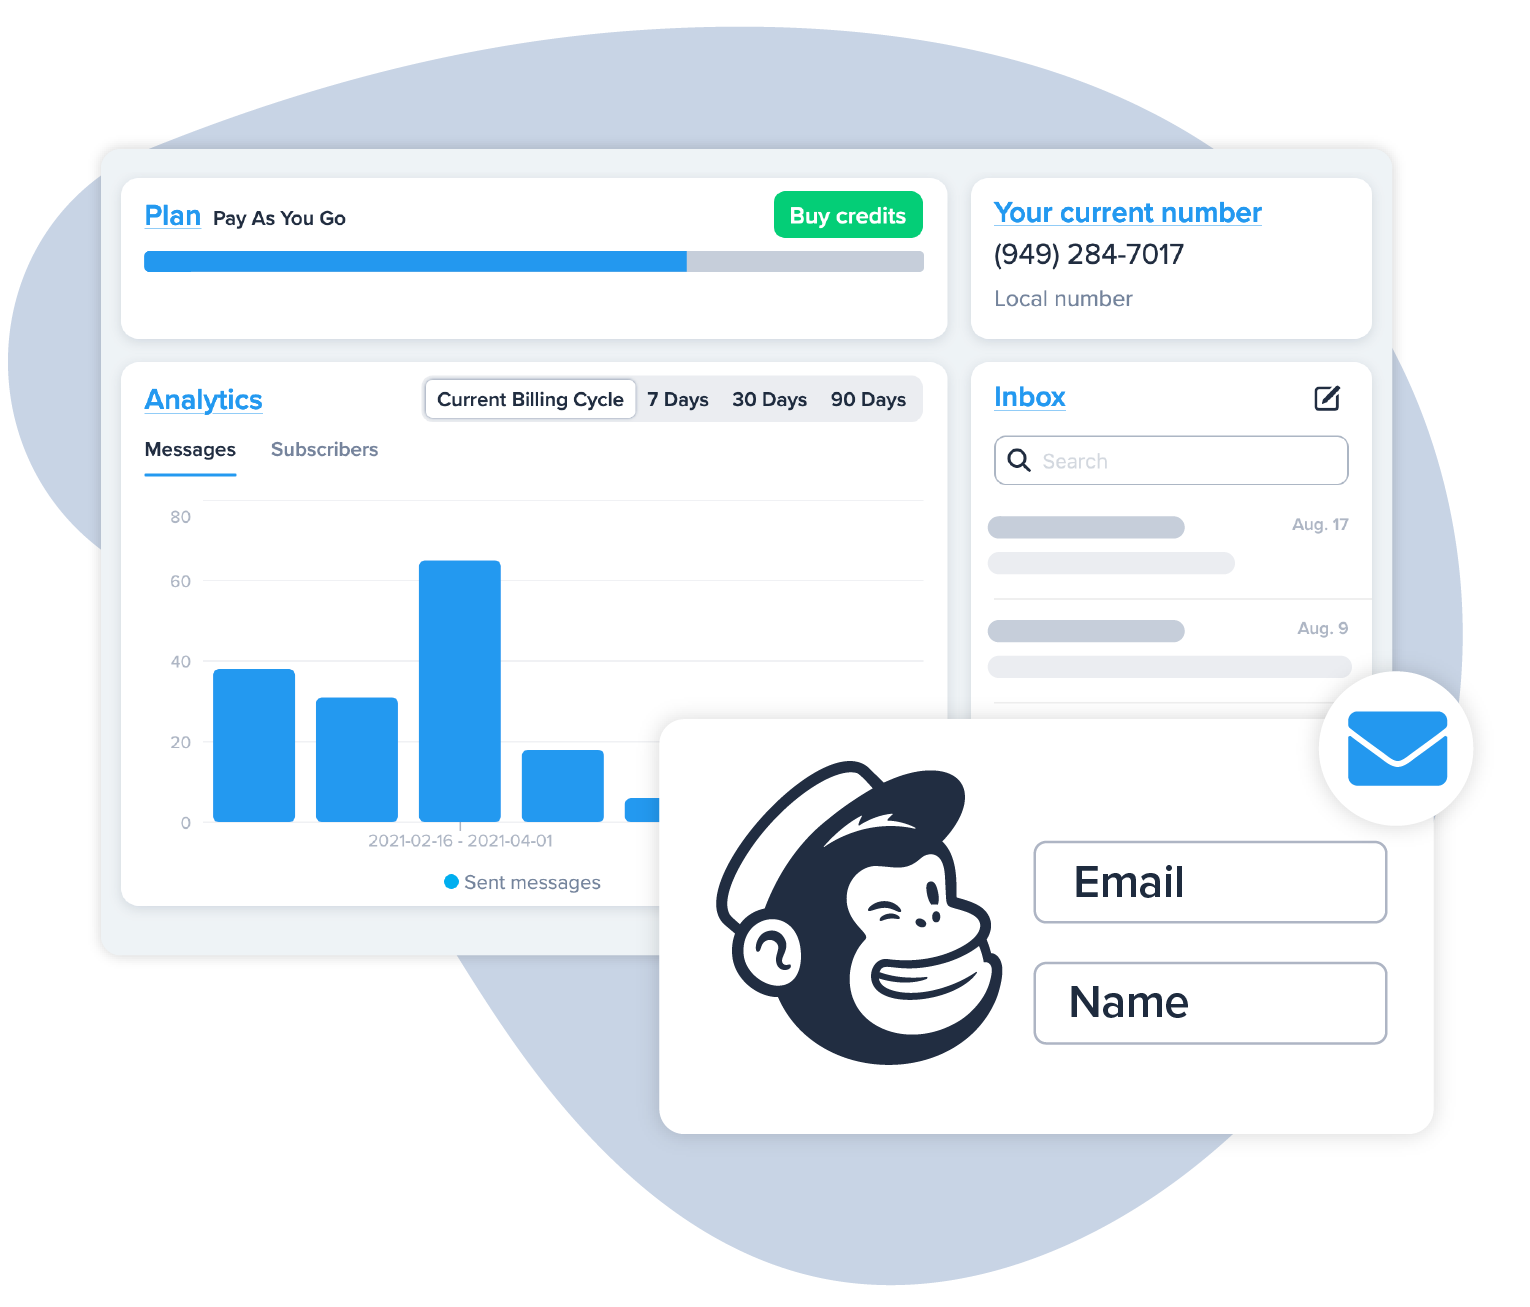 how to add a user account for mail chimp